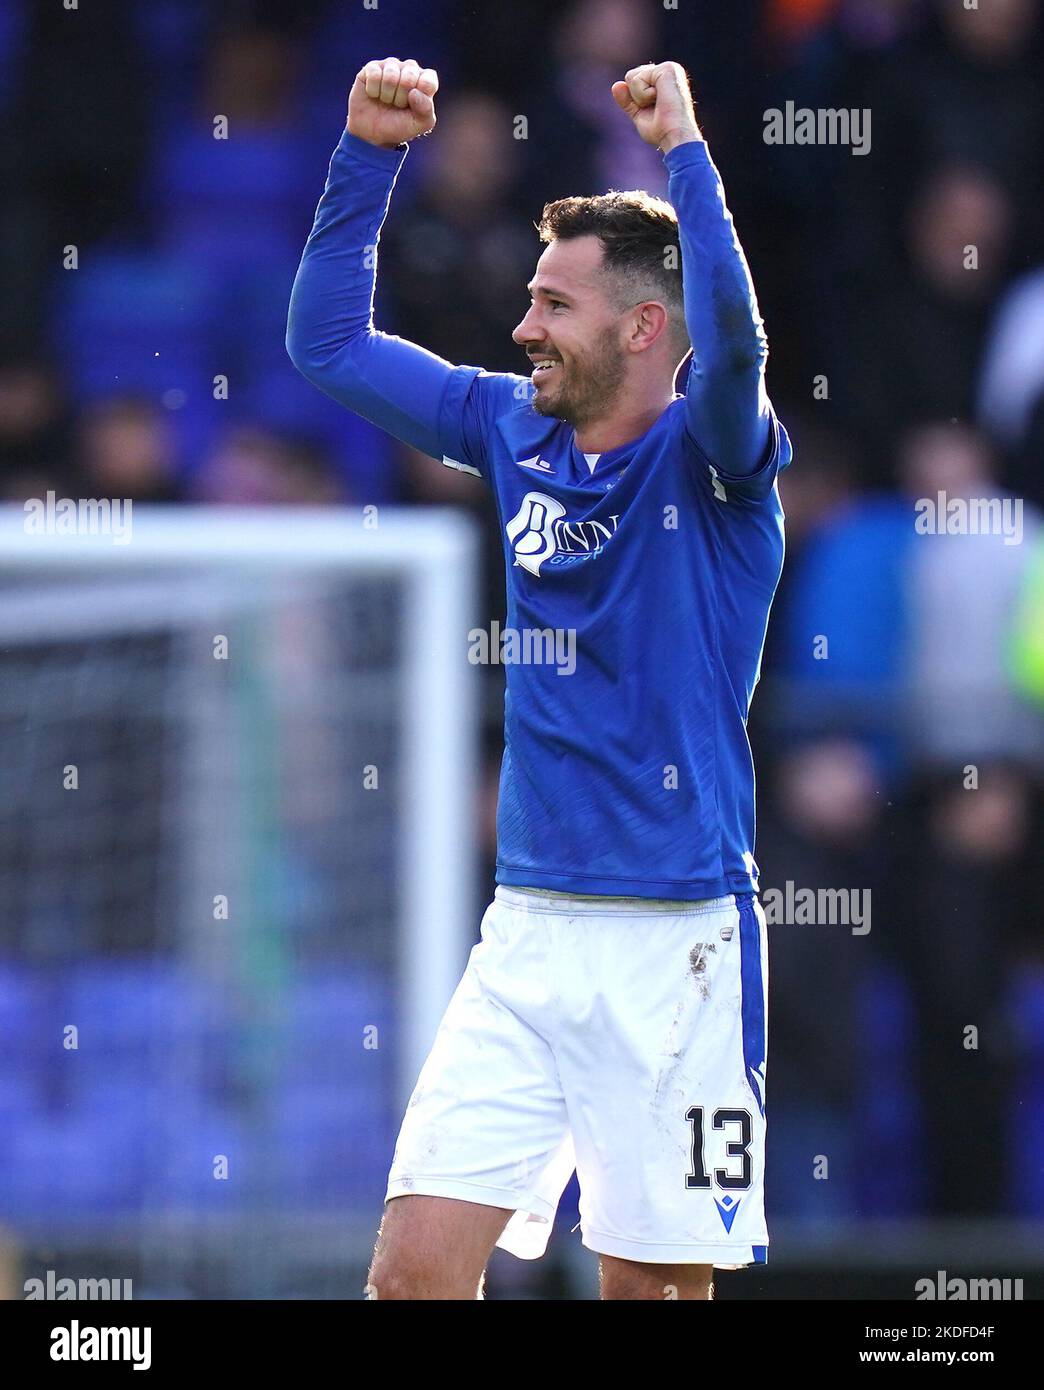 St Johnstone's Ryan McGowan celebrates victory after the final whistle in the cinch Premiership match at McDiarmid Park, Perth. Picture date: Sunday November 6, 2022. Stock Photo